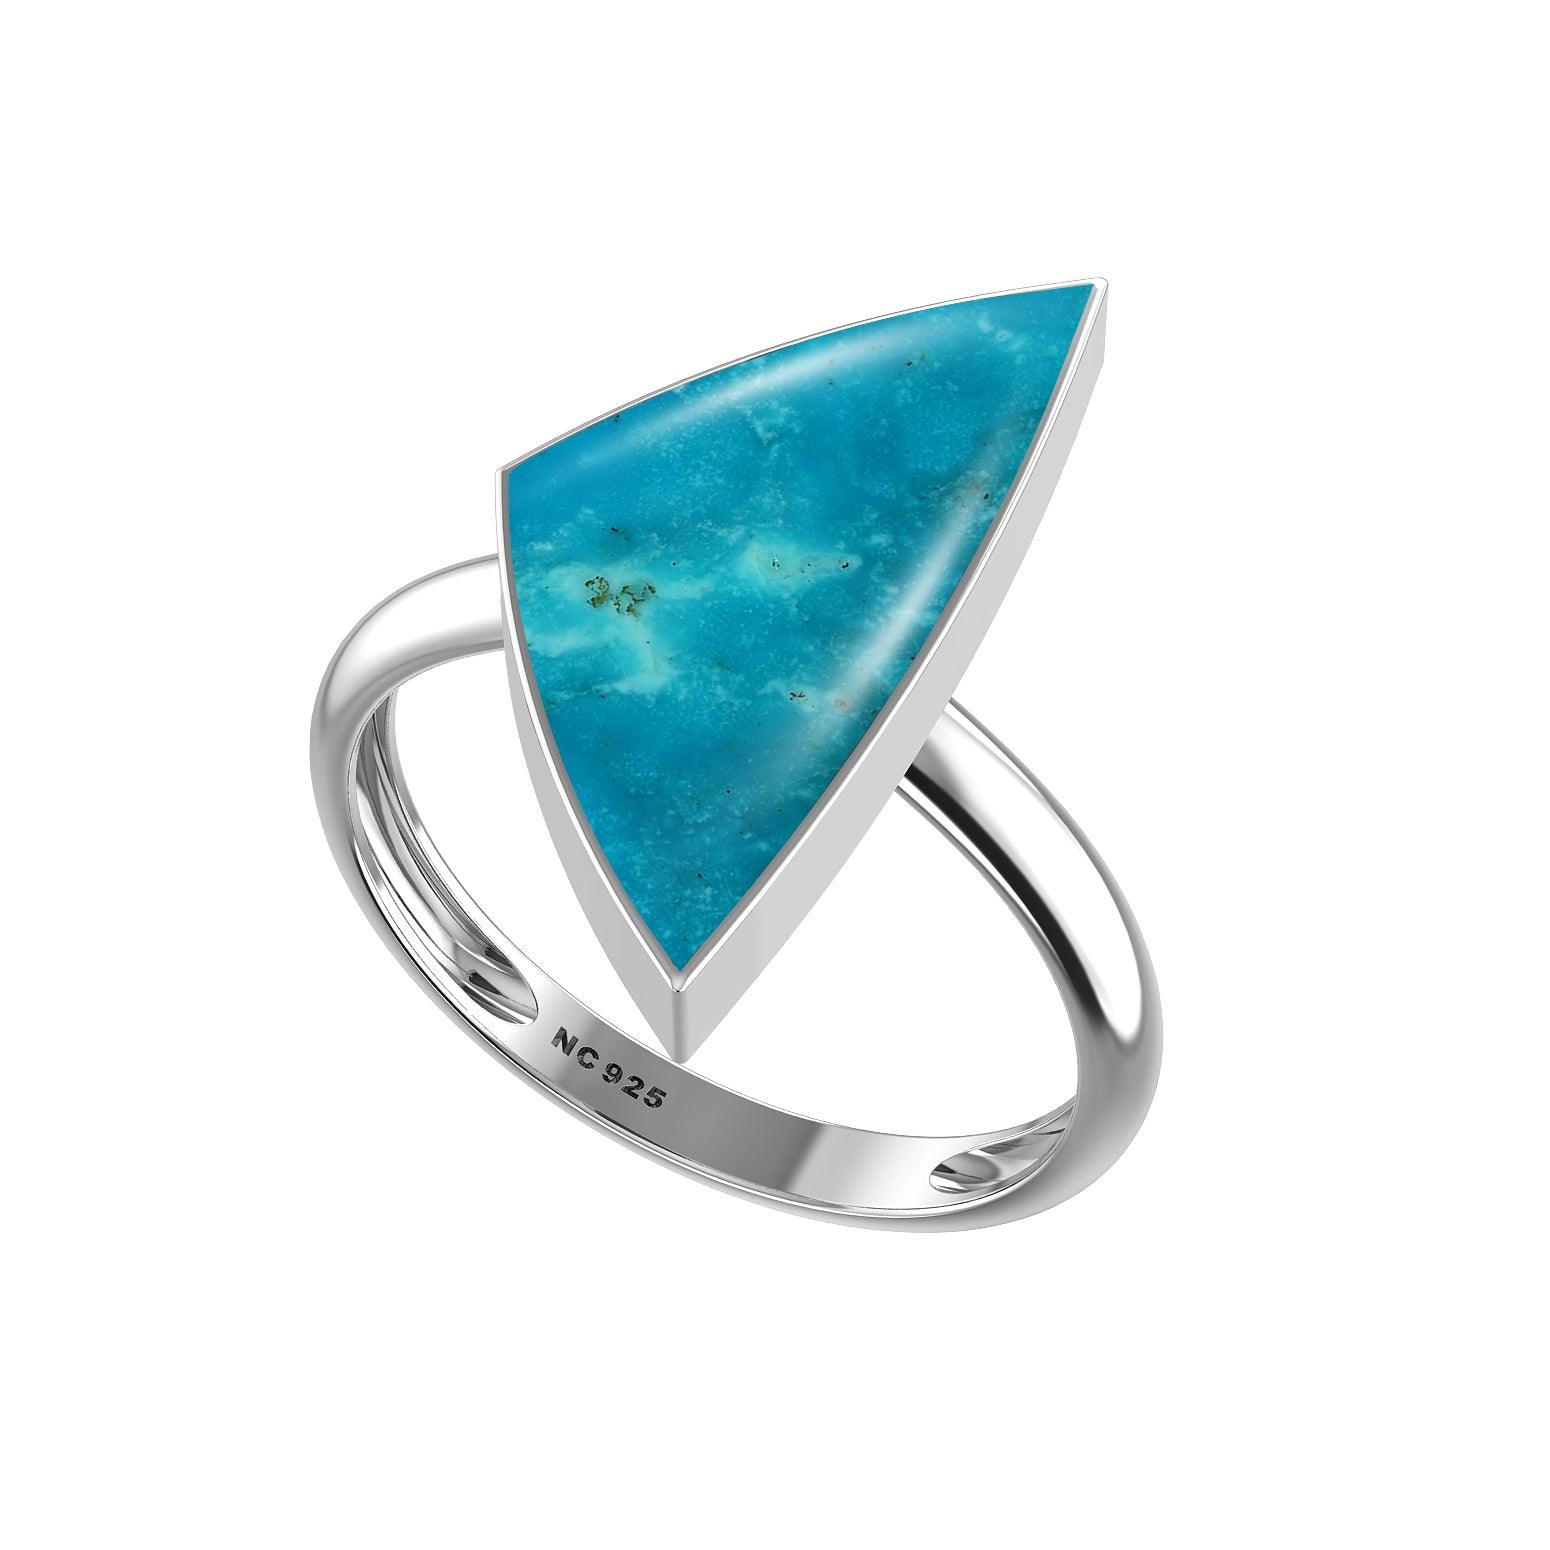 Natural Turquoise Ring 925 Sterling Silver Bezel Set Handmade Jewelry Pack of 6 (Box 8)